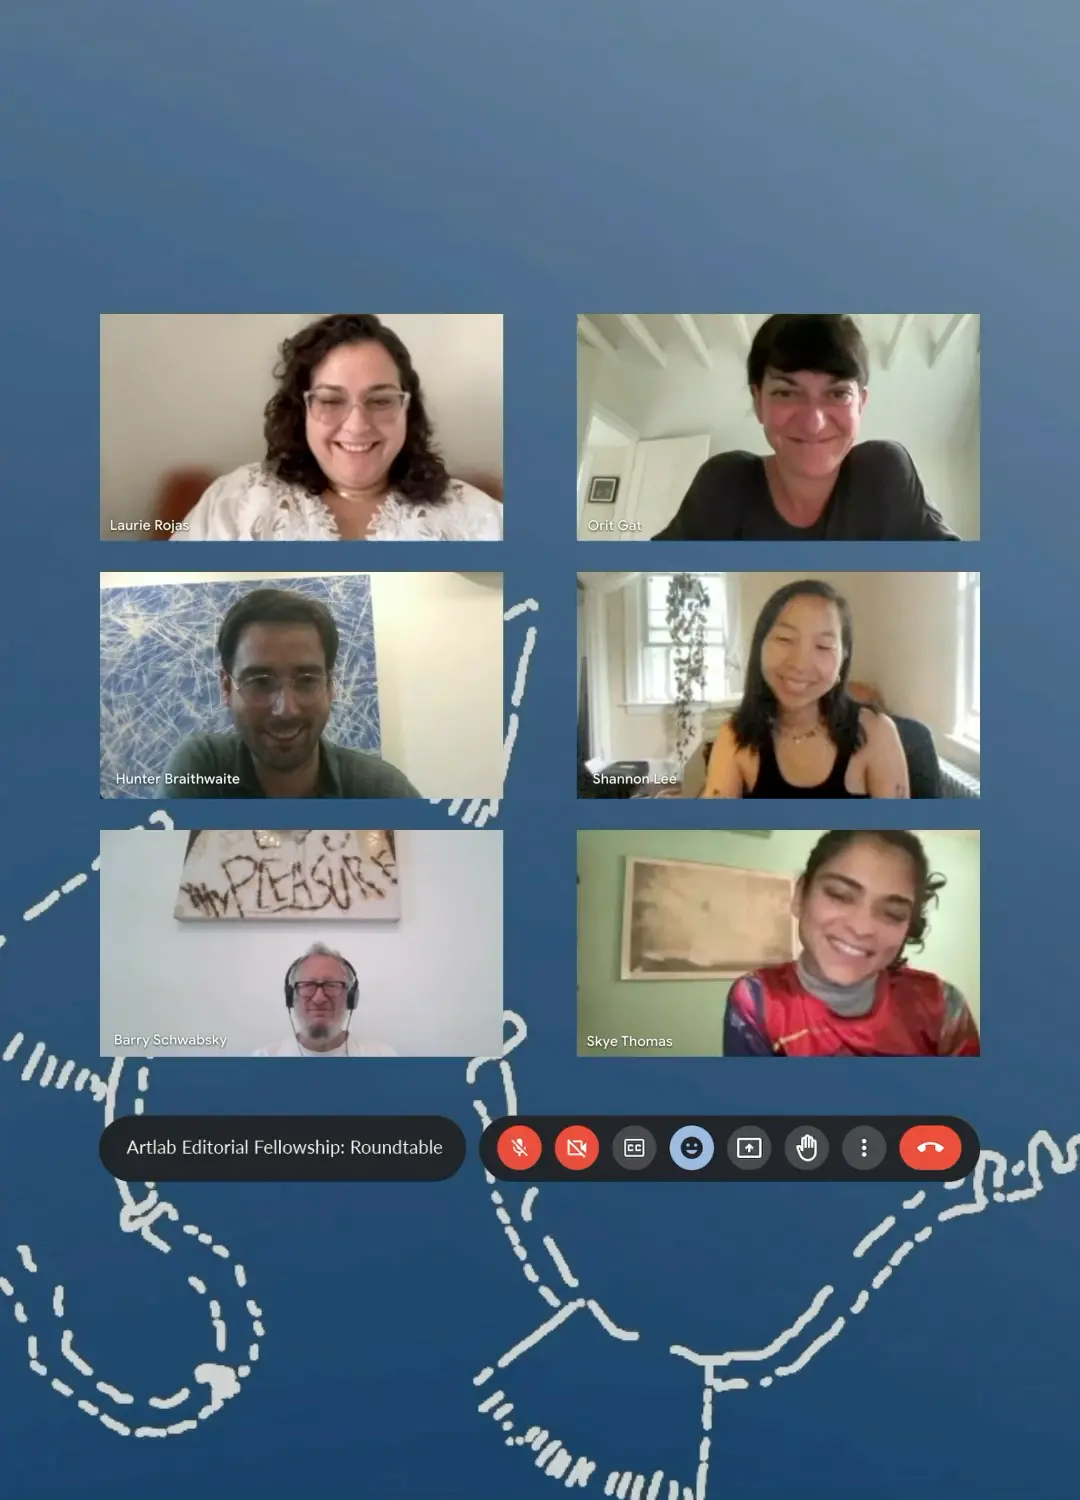 Six individuals appear in a virtual meeting, arranged in two columns of digital boxes on a screen. They engage in a discussion, each box showing a diverse expression, suggesting an energetic exchange of ideas.